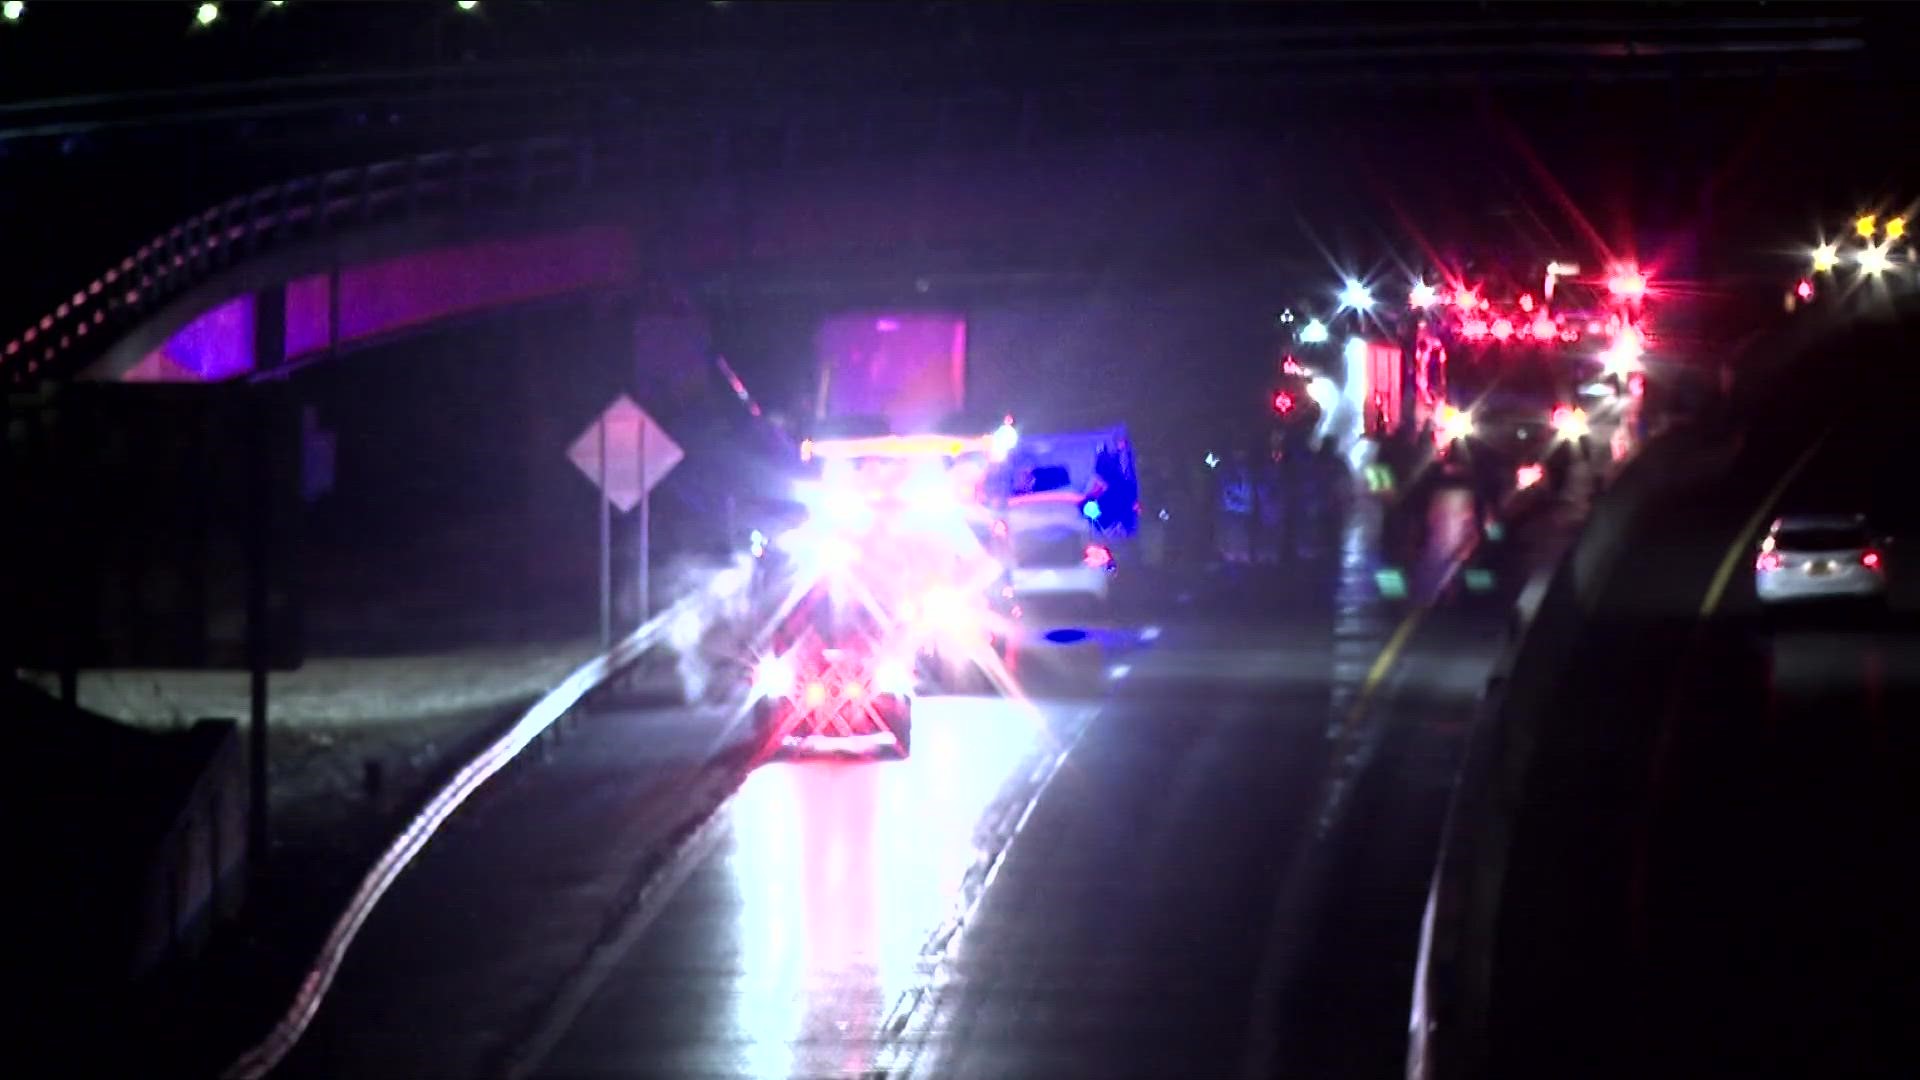 2 people were killed when a tractor trailer hit a disabled vehicle on the I-190 on Friday morning.